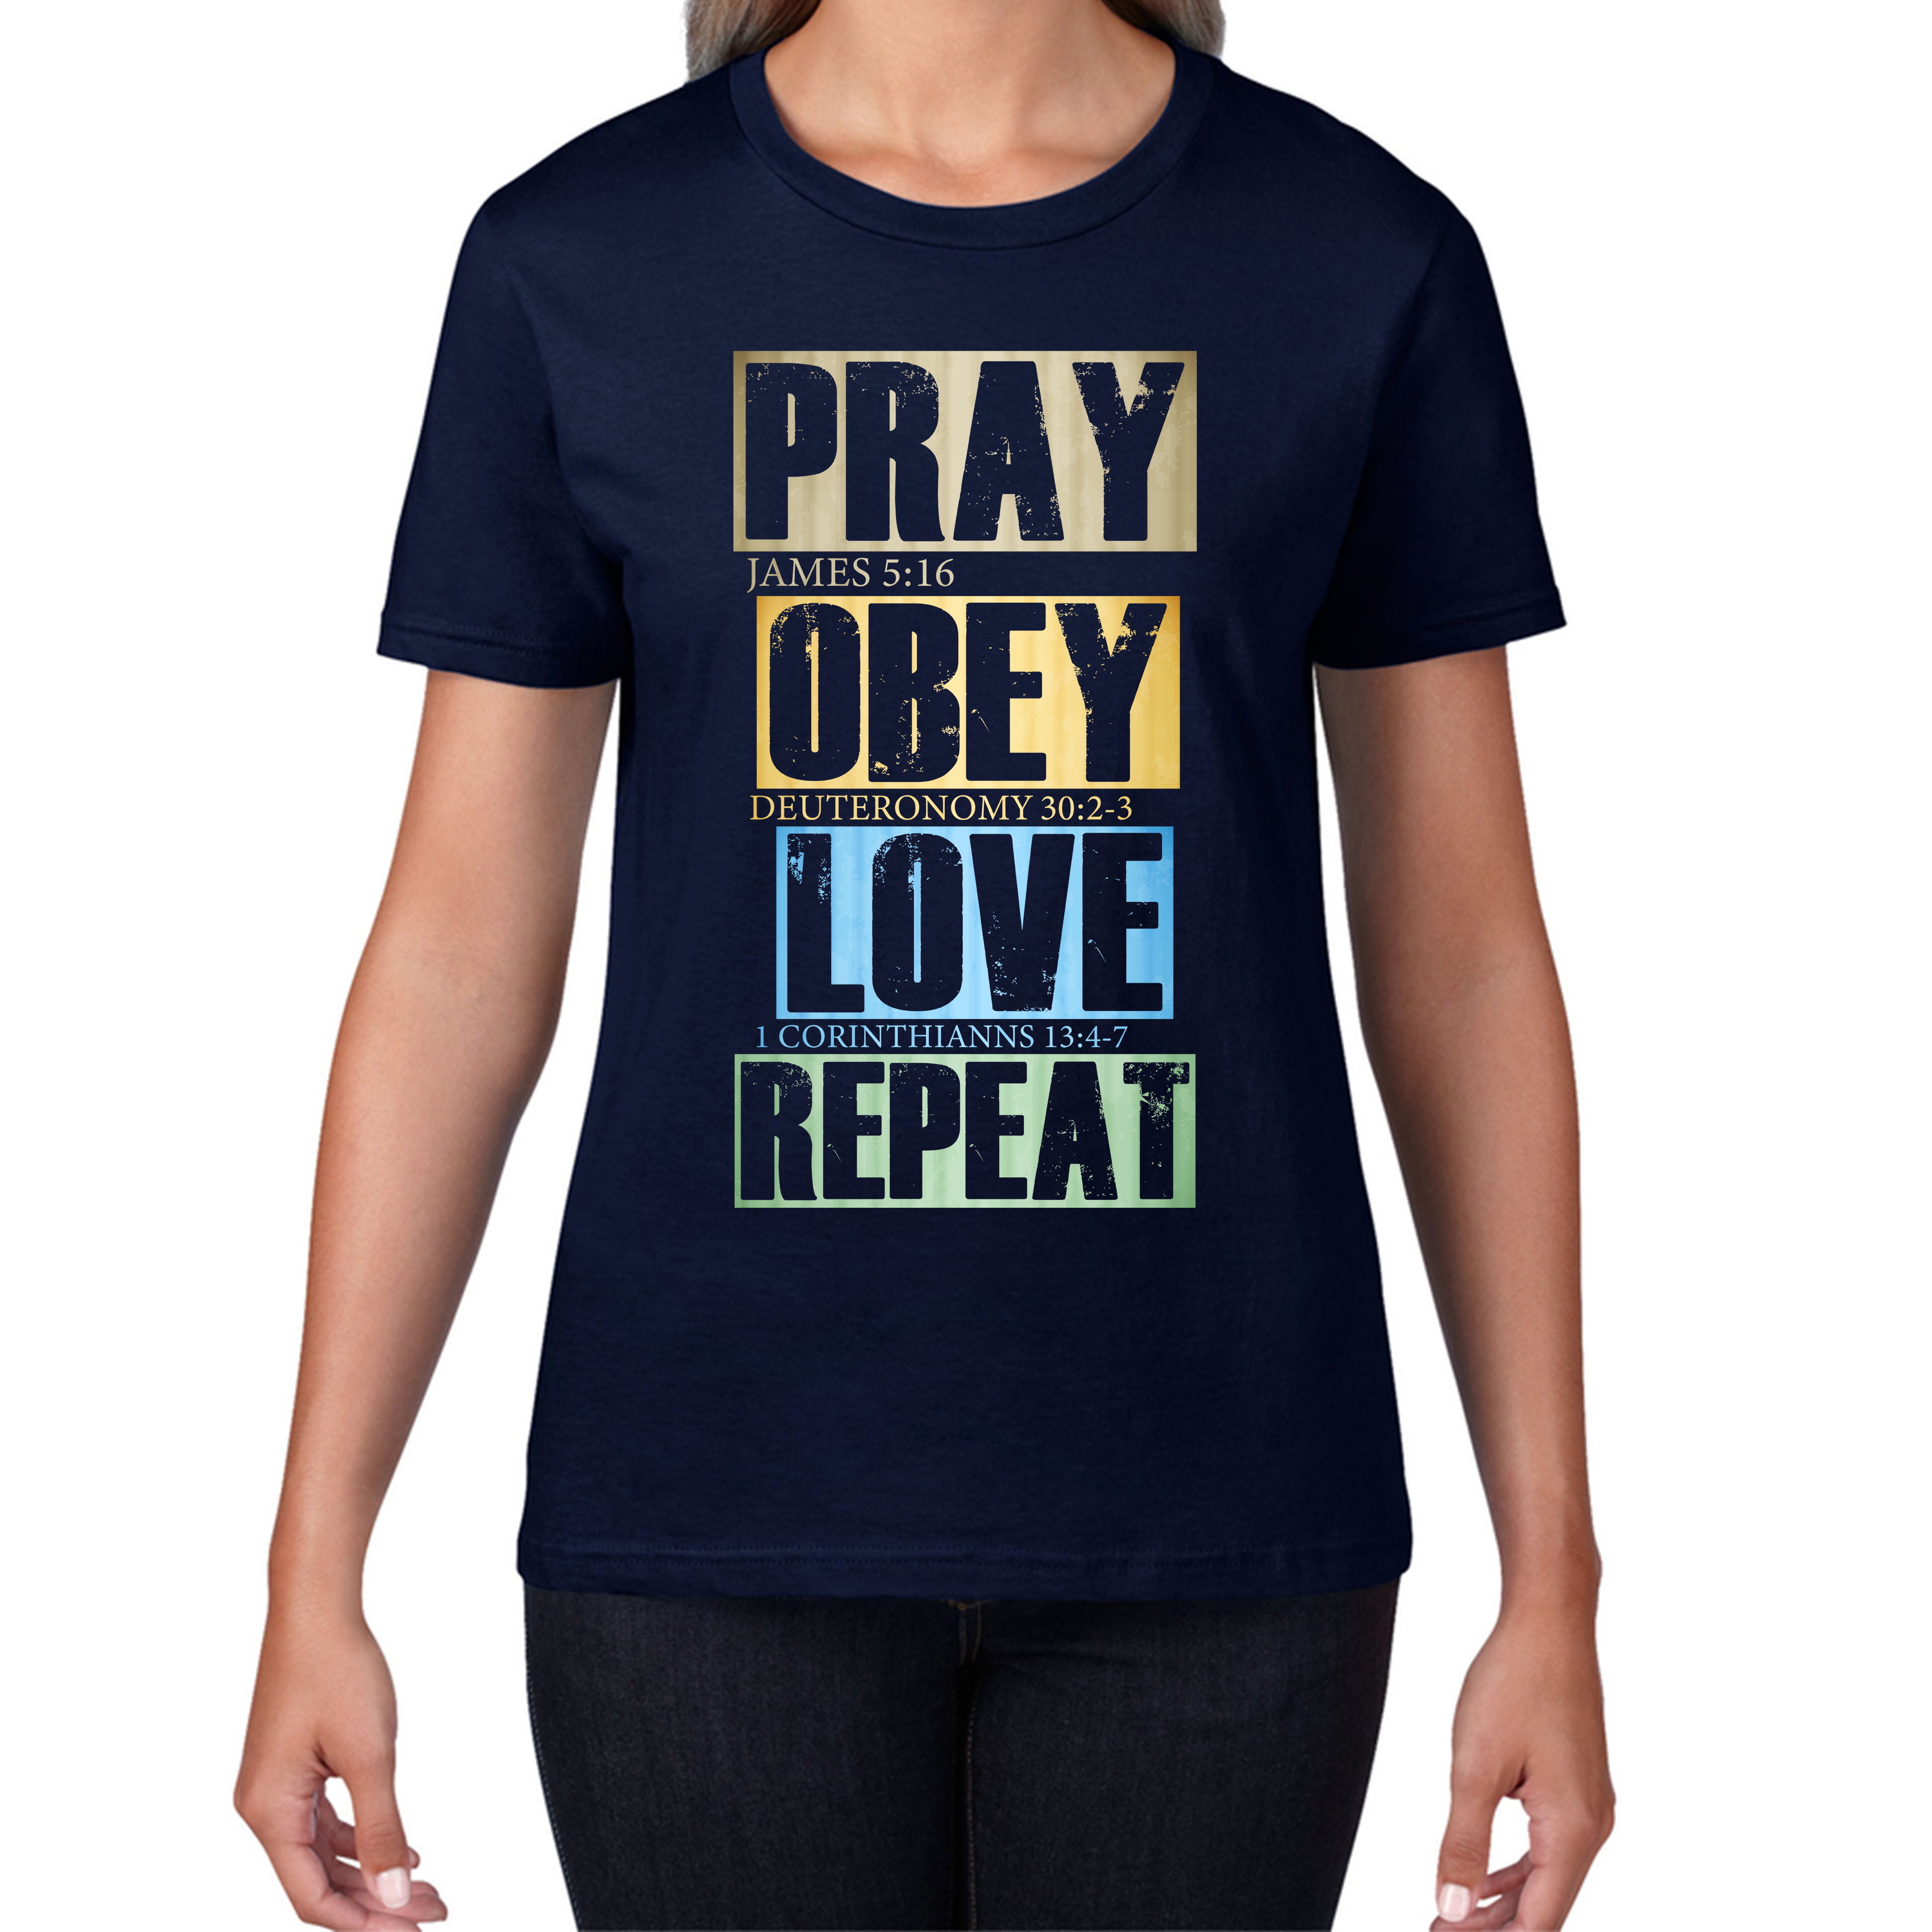 Pray Obey Love Repeat Vintage Christian Bible Christianity Womens Tee Top